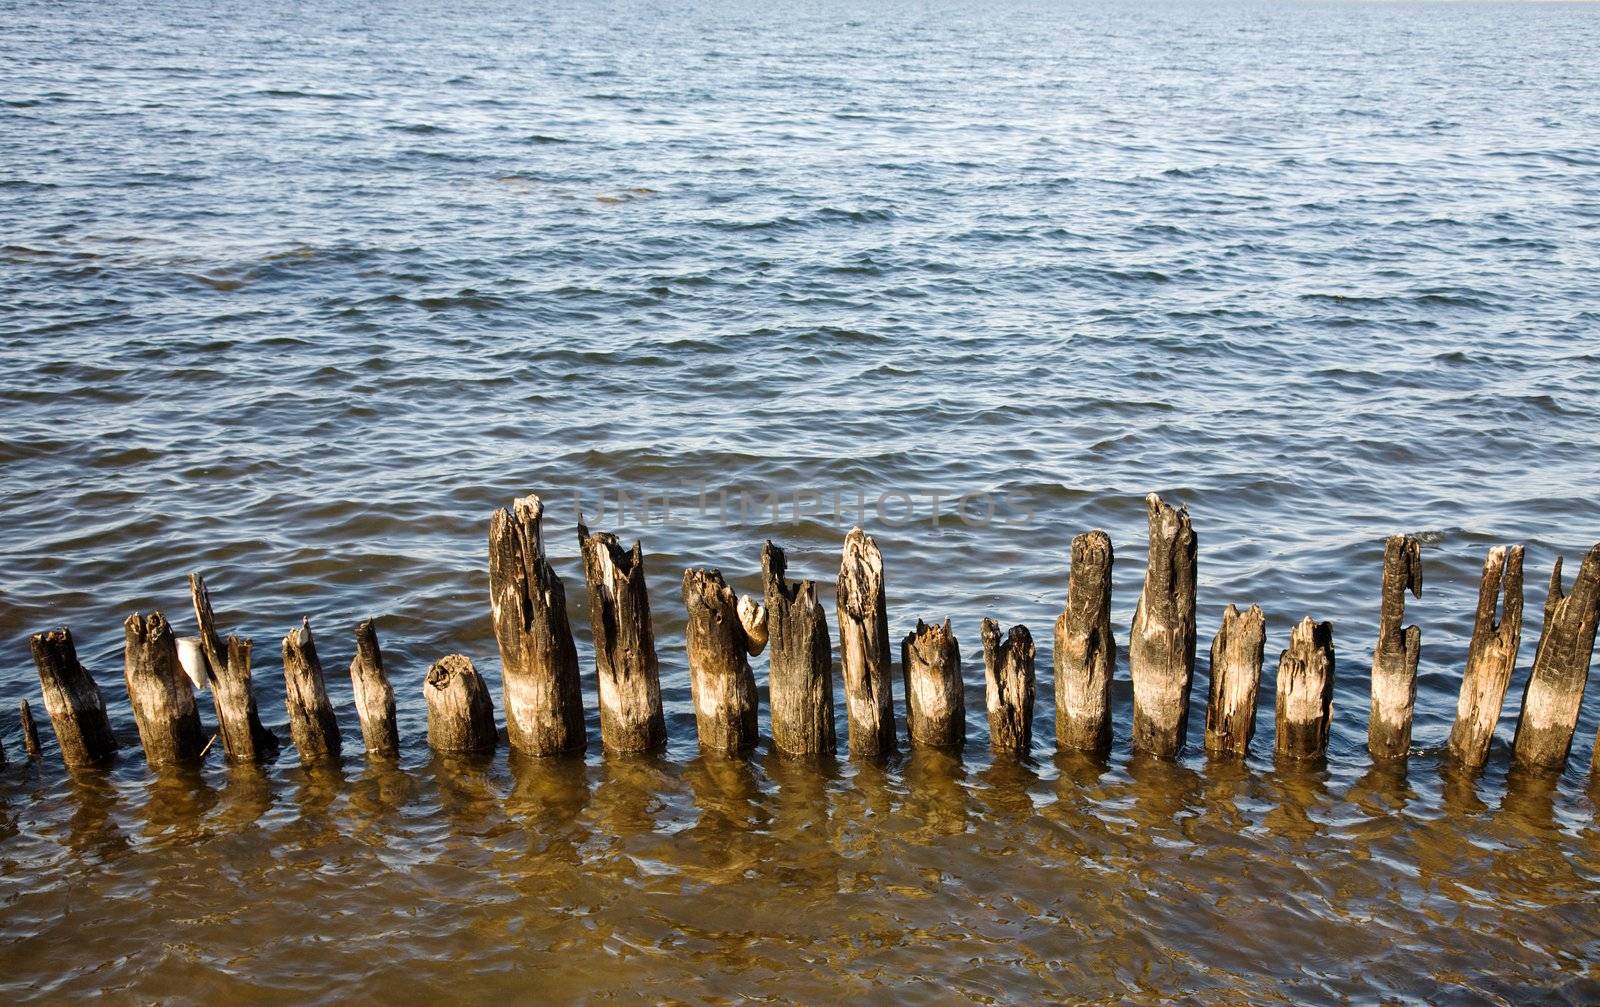 Old rotten columns in lake